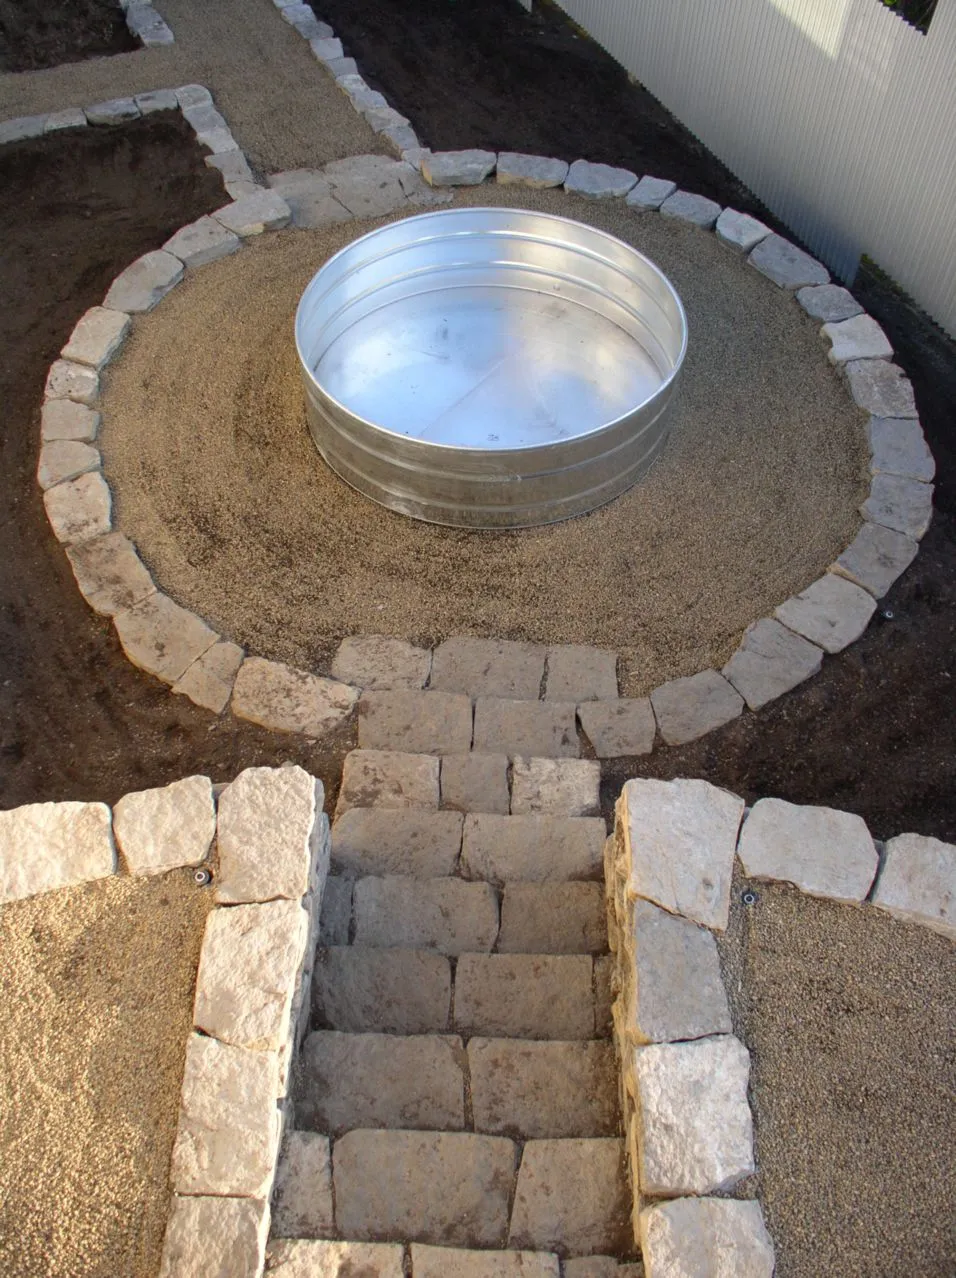 Circular metal fire pit centered within a patterned stone patio.